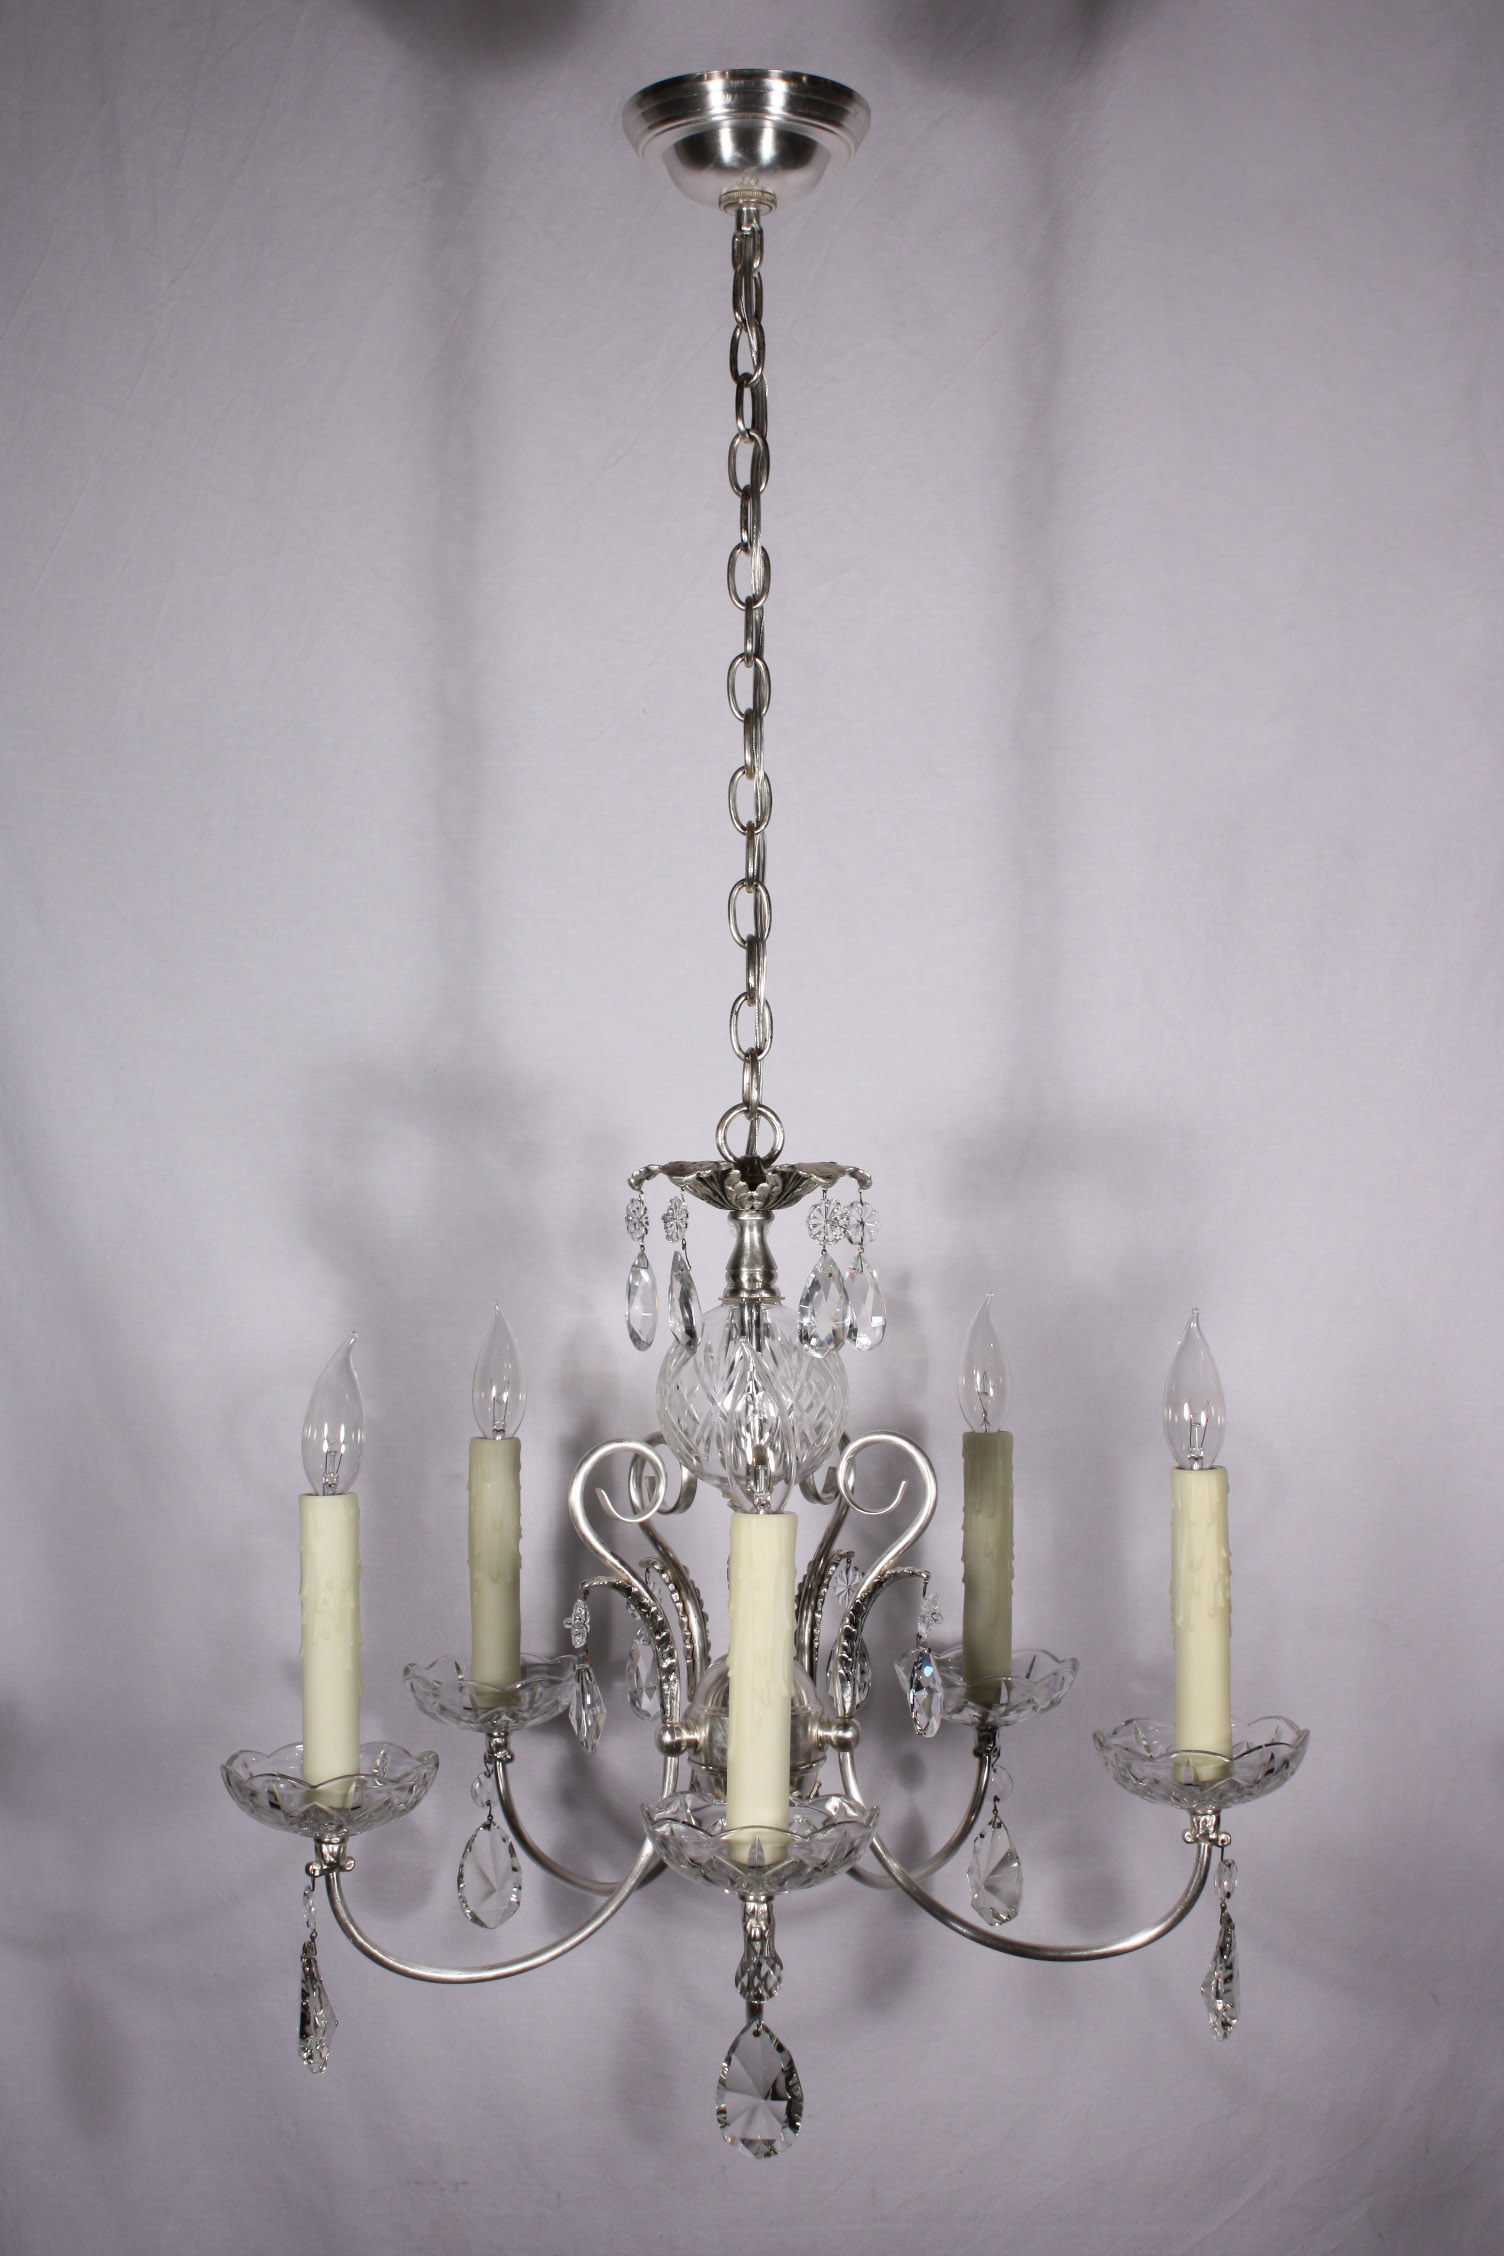 SOLD Superb Antique Georgian Silver Plated Chandelier with Crystal Prisms, c. 1910-18822